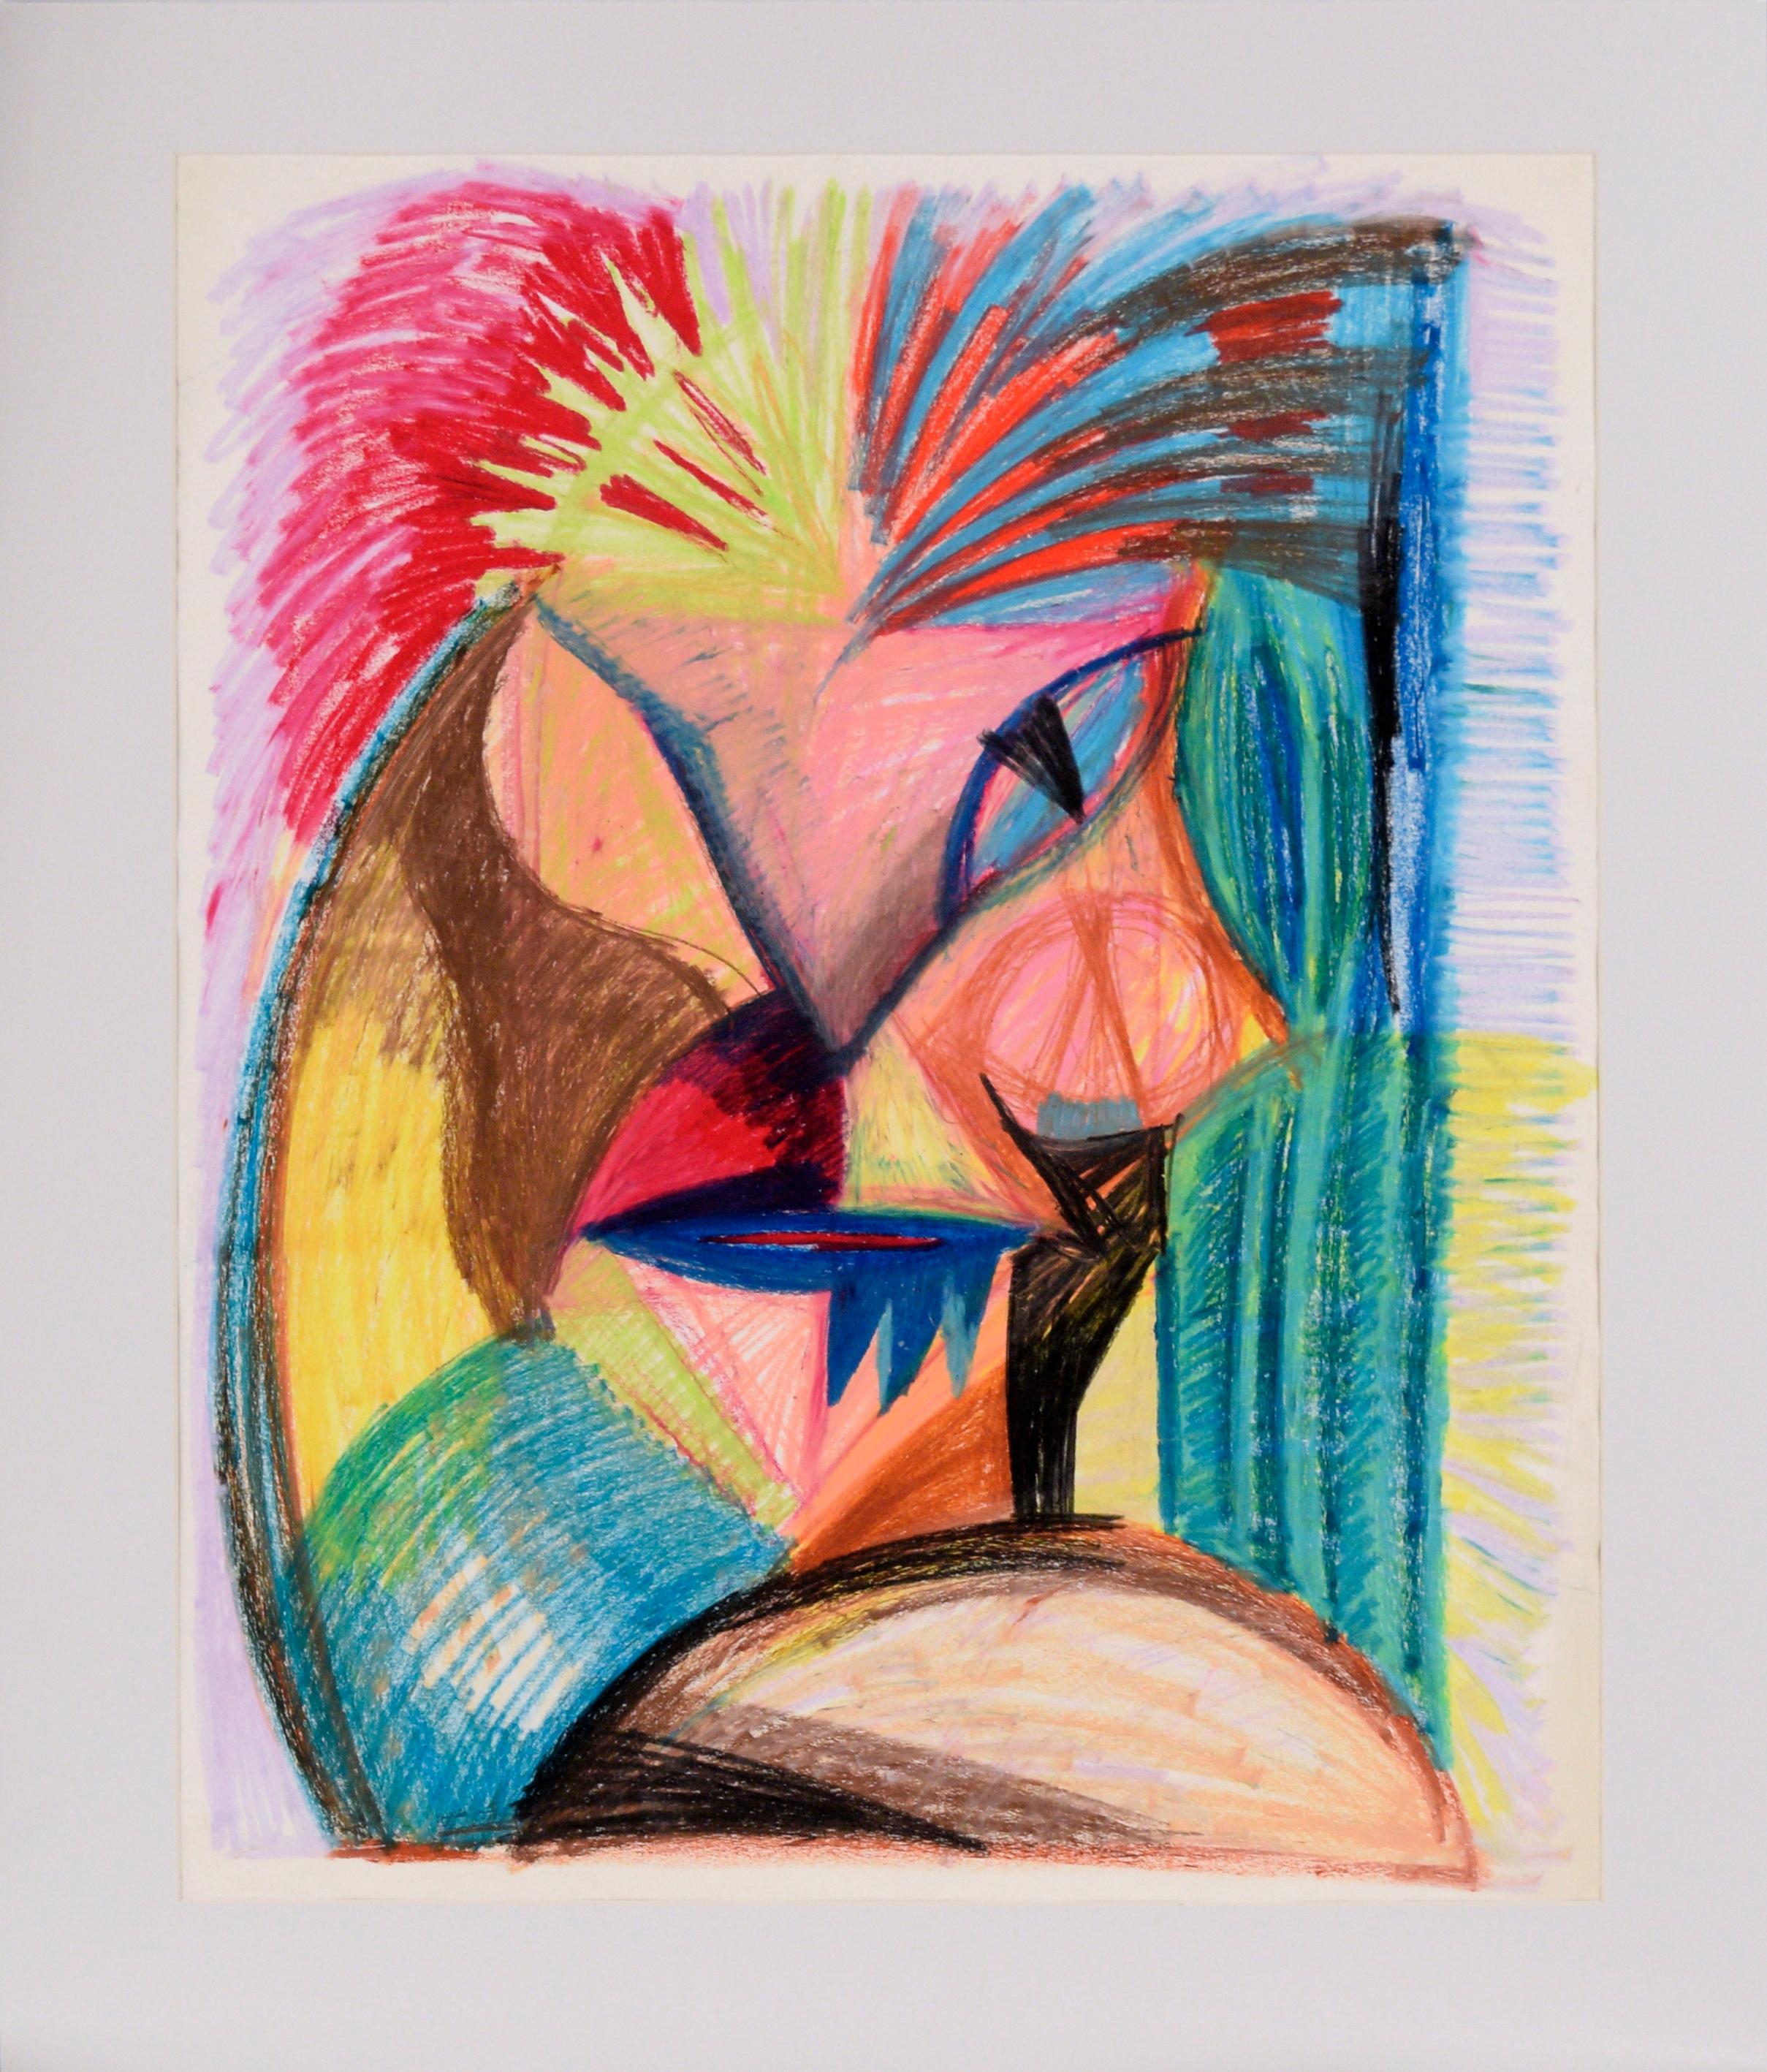 Abstracted Cubist Lion Portrait in Pastel on Paper